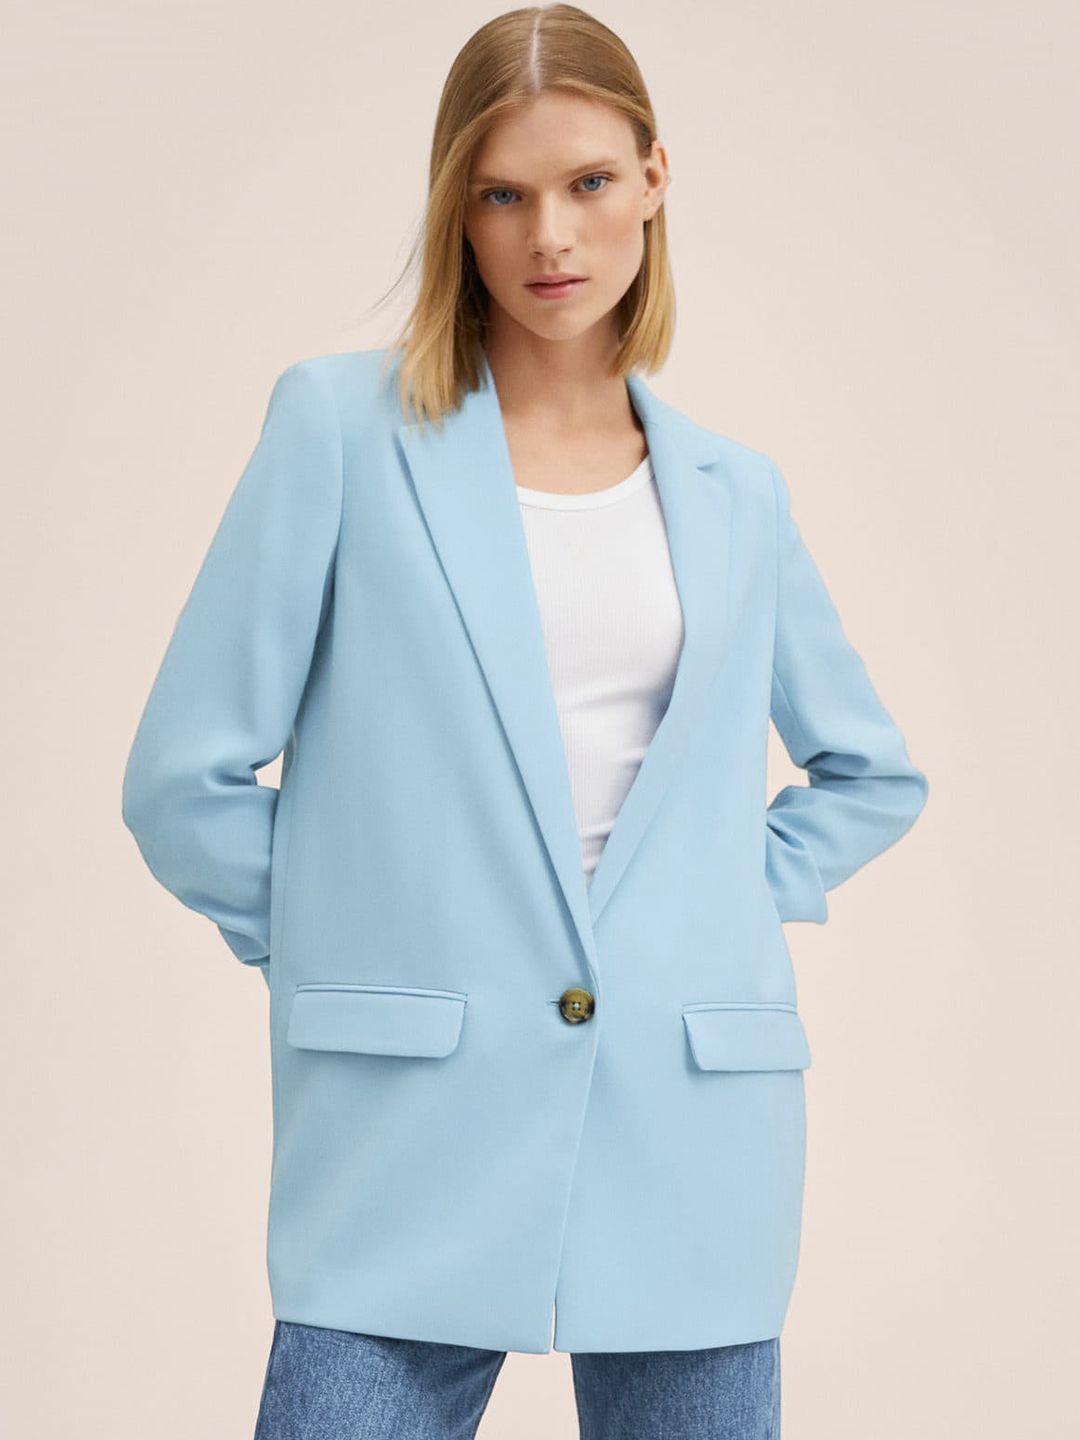 MANGO Women Blue Solid Single-Breasted Oversized Blazer Price in India